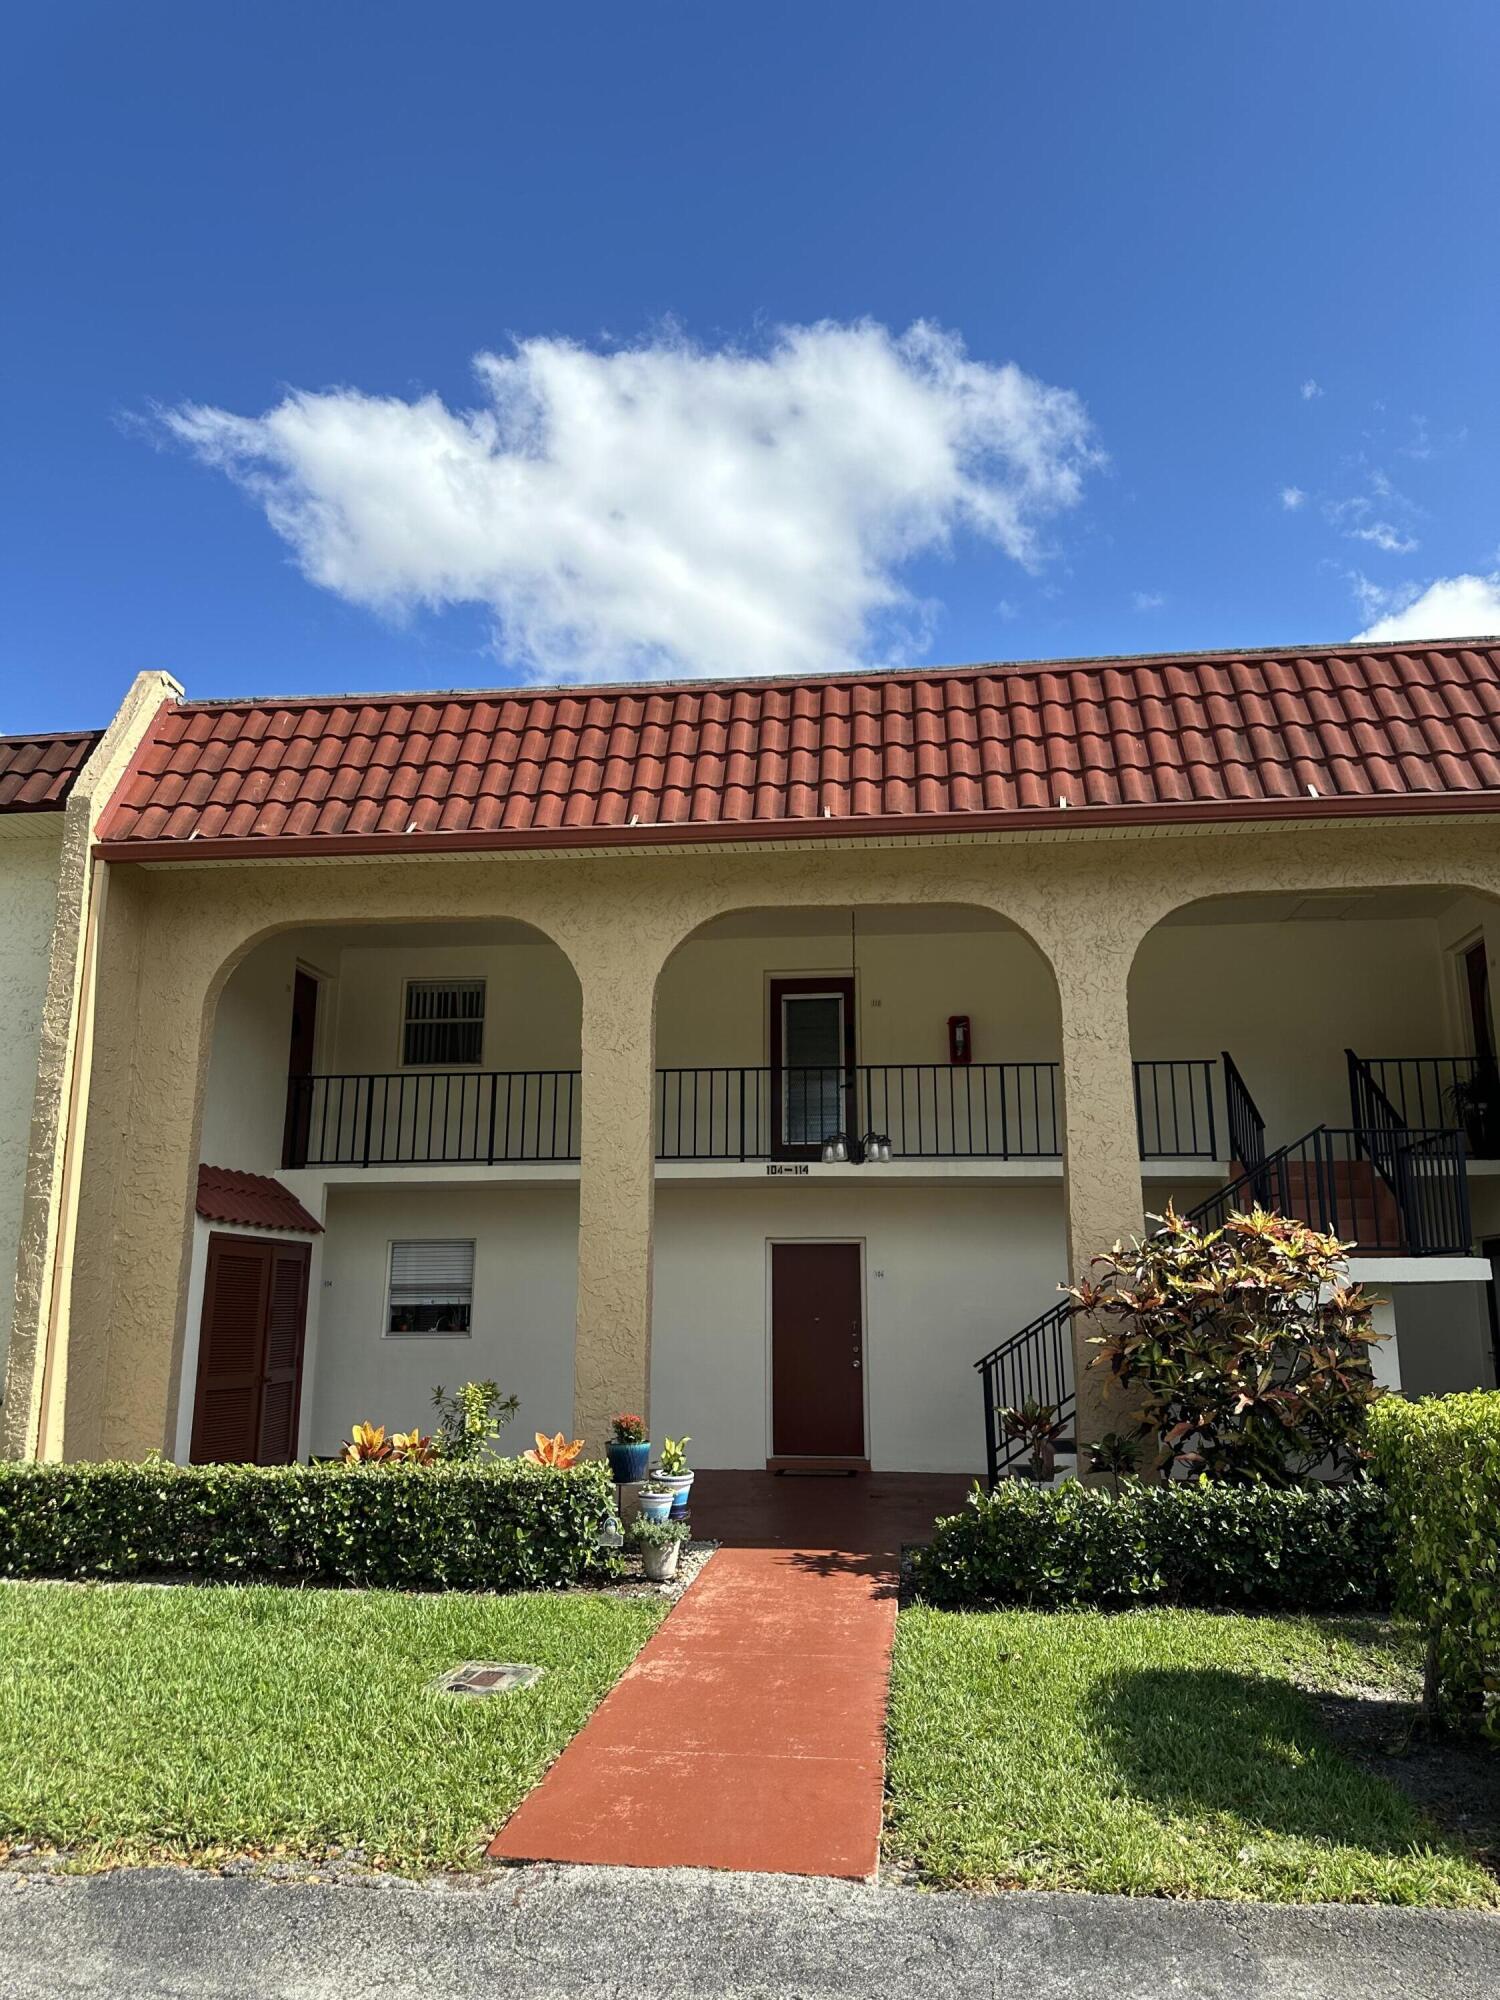 Property for Sale at 112 Lake Evelyn Drive 112, West Palm Beach, Palm Beach County, Florida - Bedrooms: 2 
Bathrooms: 2  - $199,900